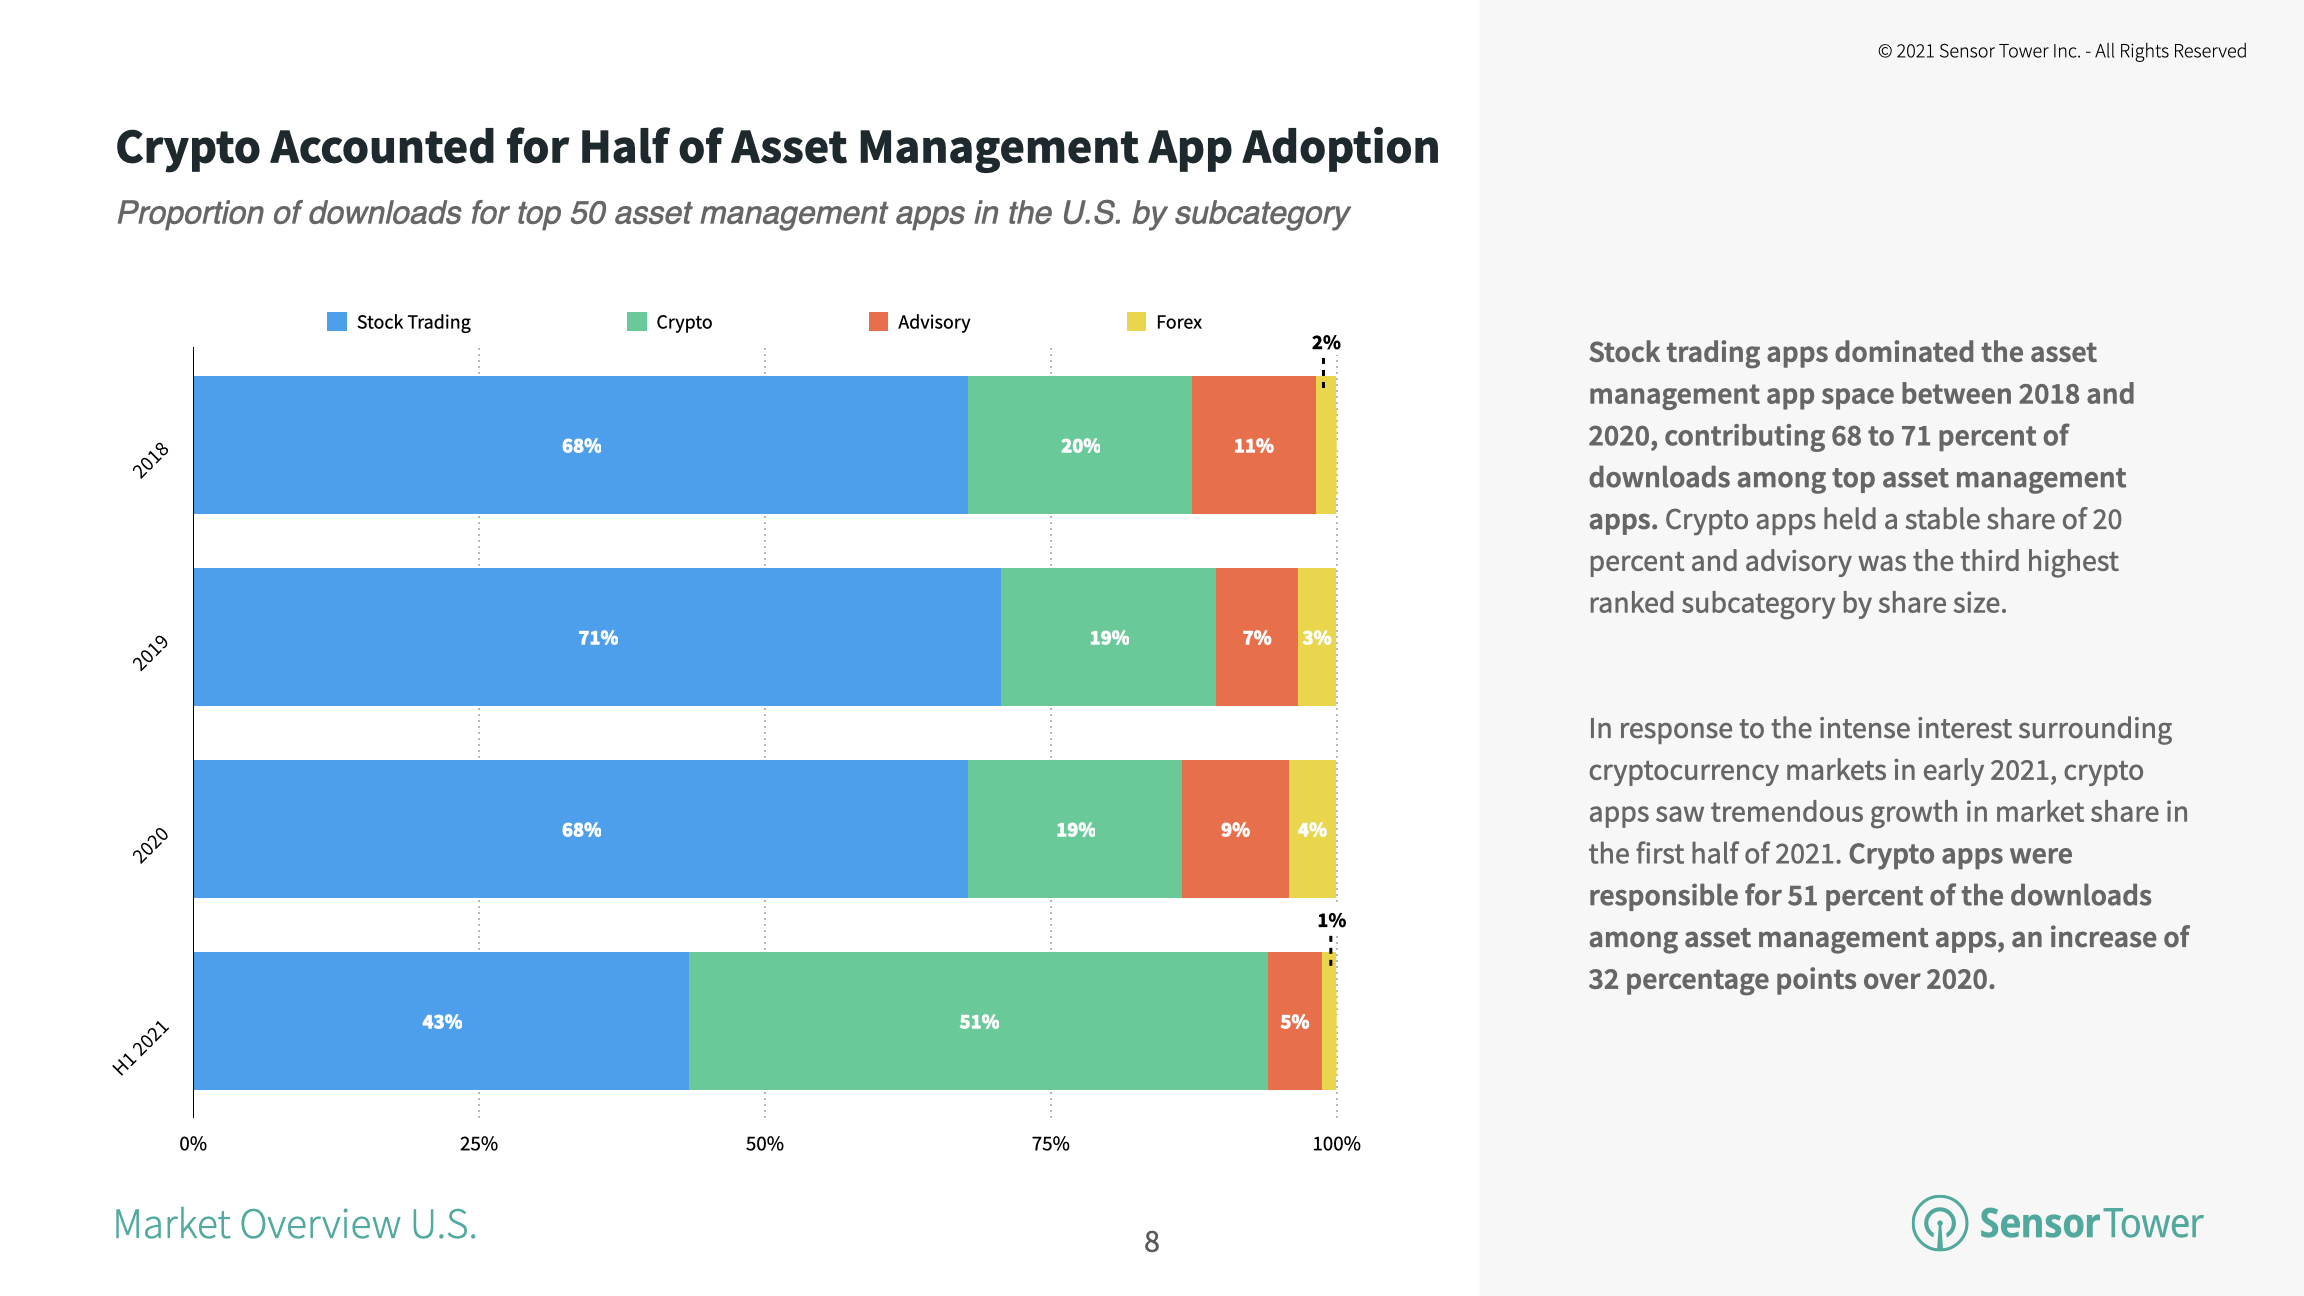 Crypto apps represented 51 percent of top asset management app downloads in 1H 2021